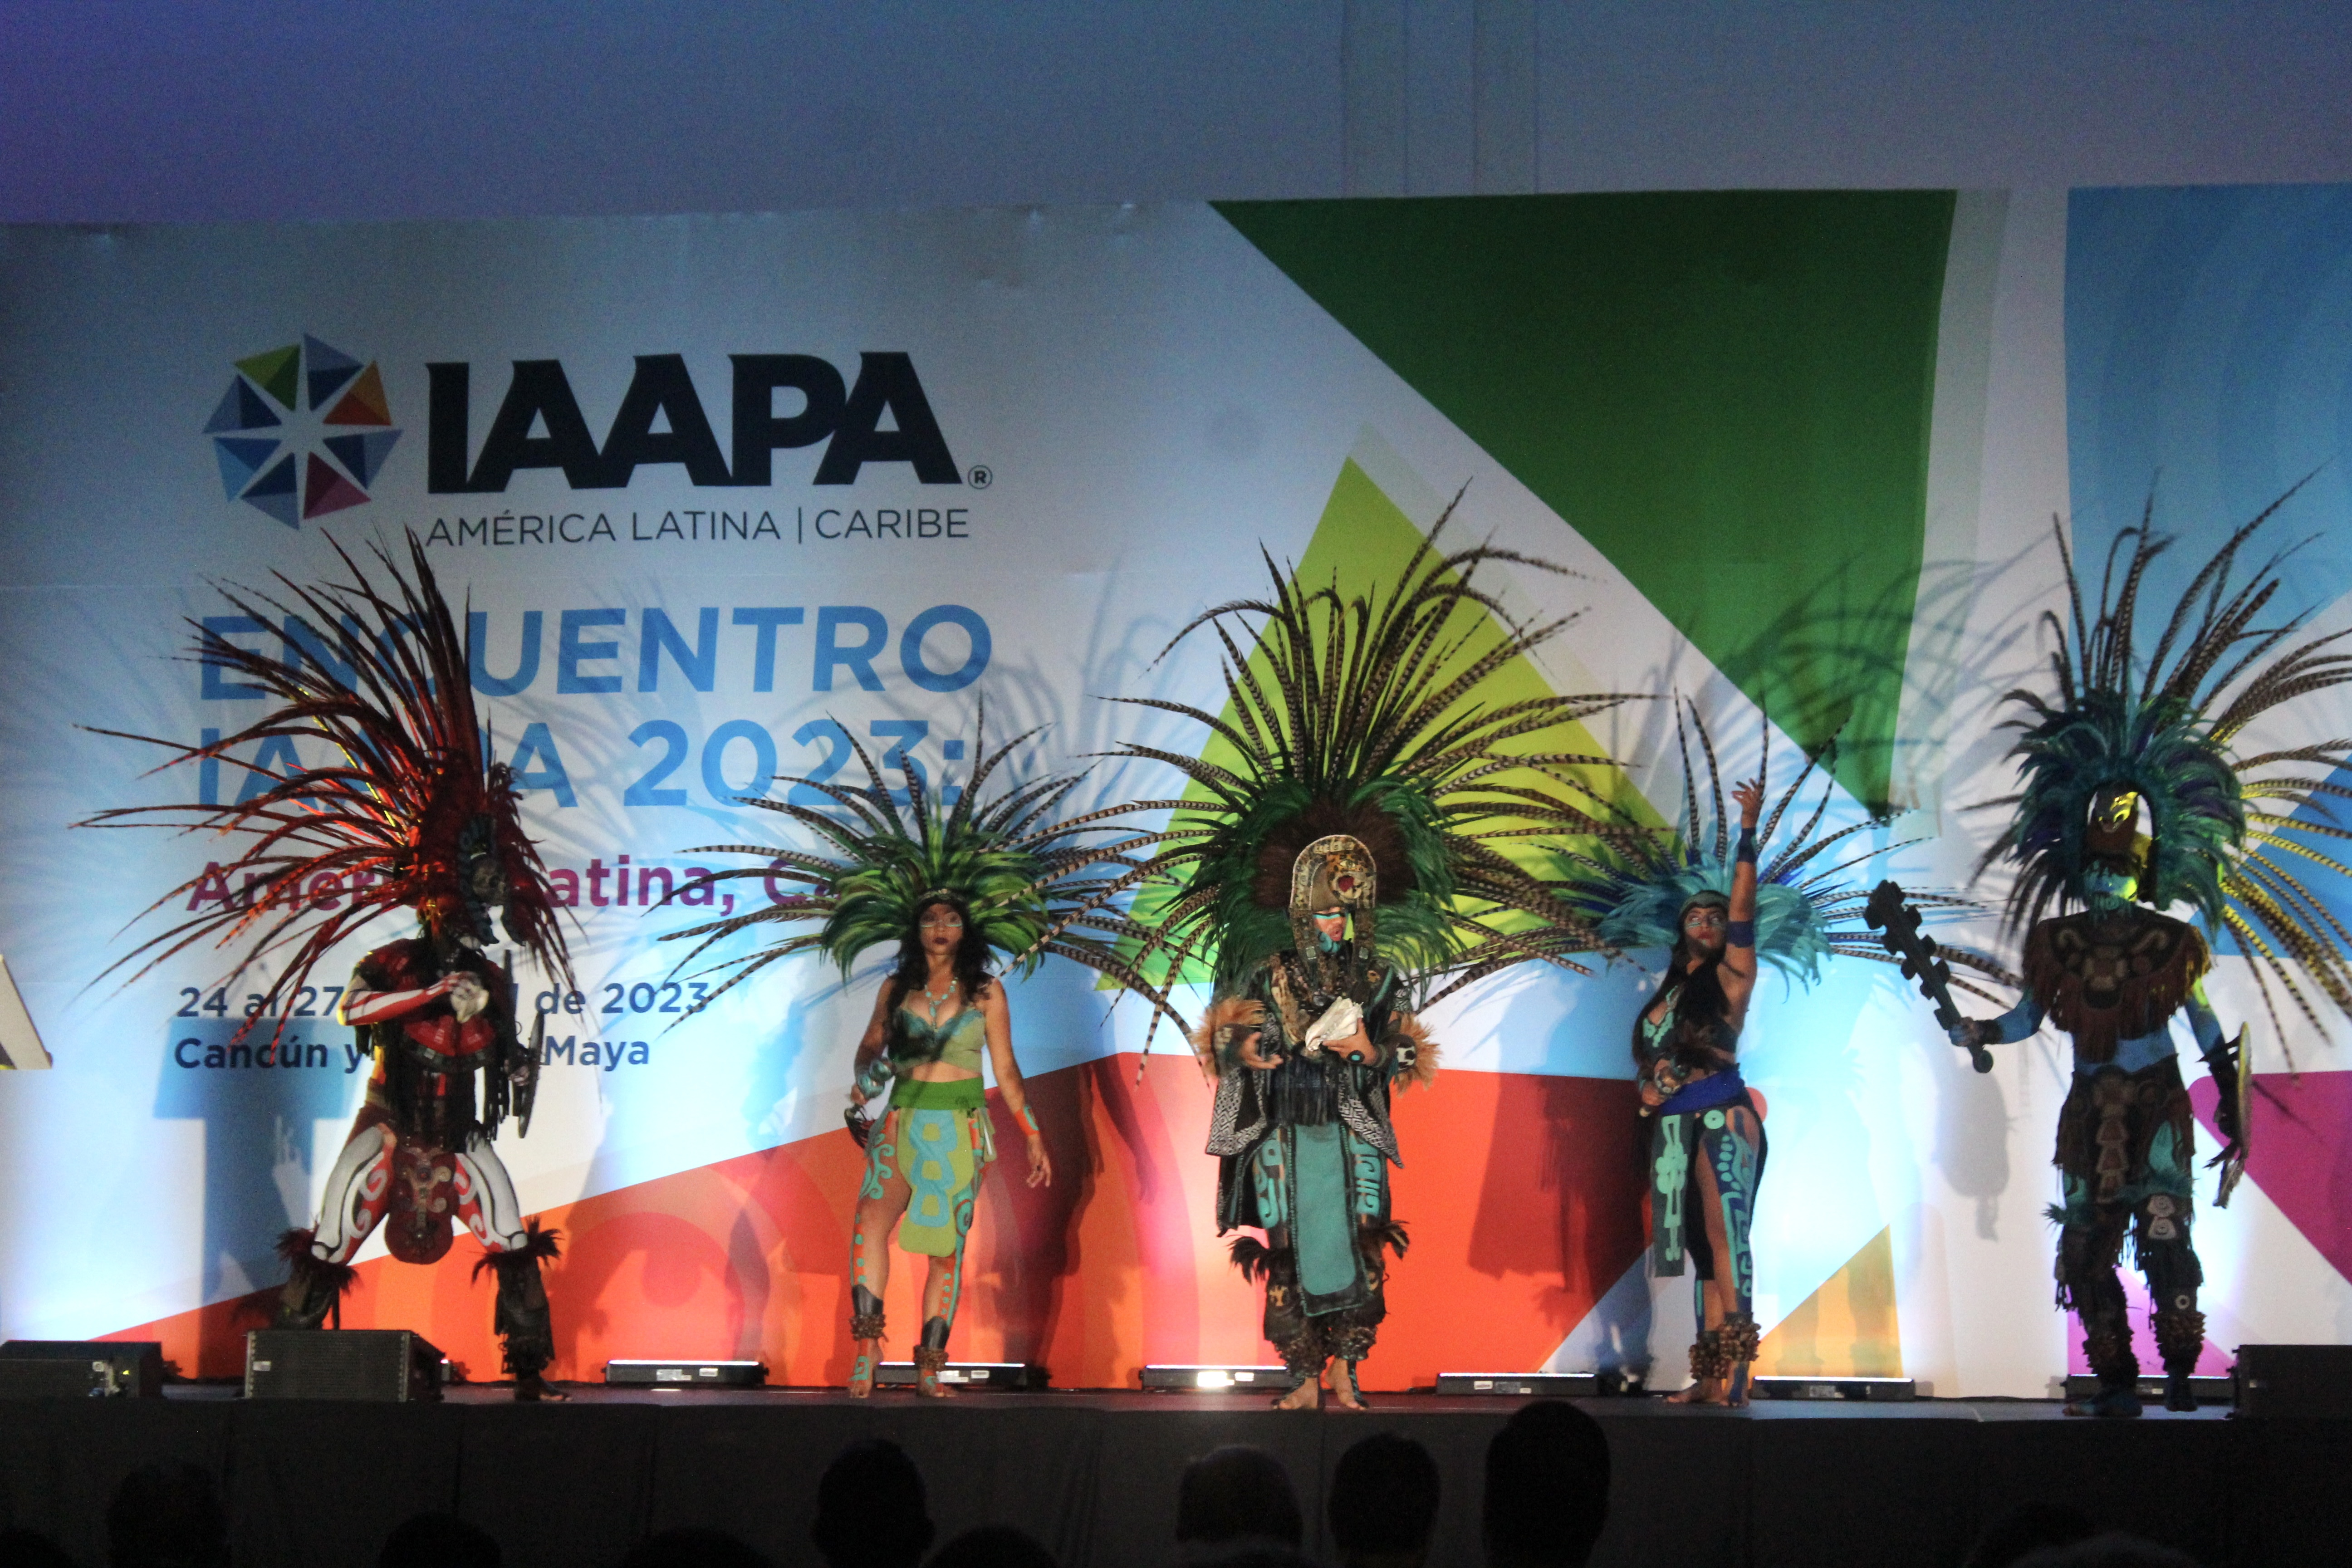 "Dancers perform a regional Mexican Concheros to open IAAPA Latin America Summit."